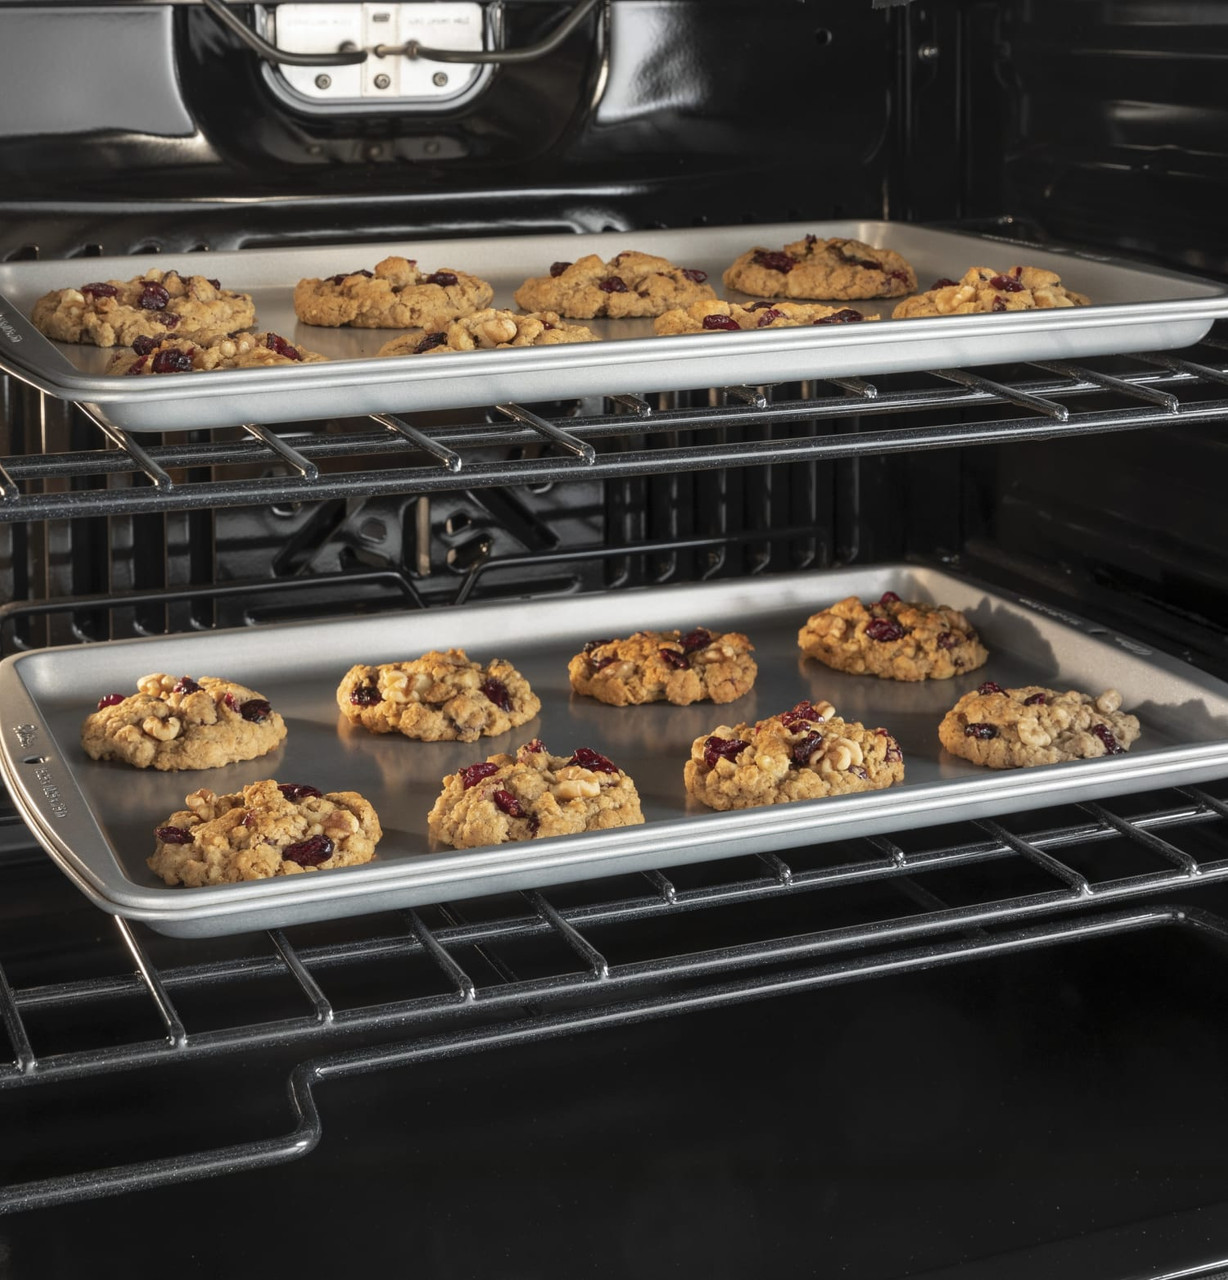 GE® 30" Smart Built-In Self-Clean Double Wall Oven with Never-Scrub Racks - JTD3000DNWW